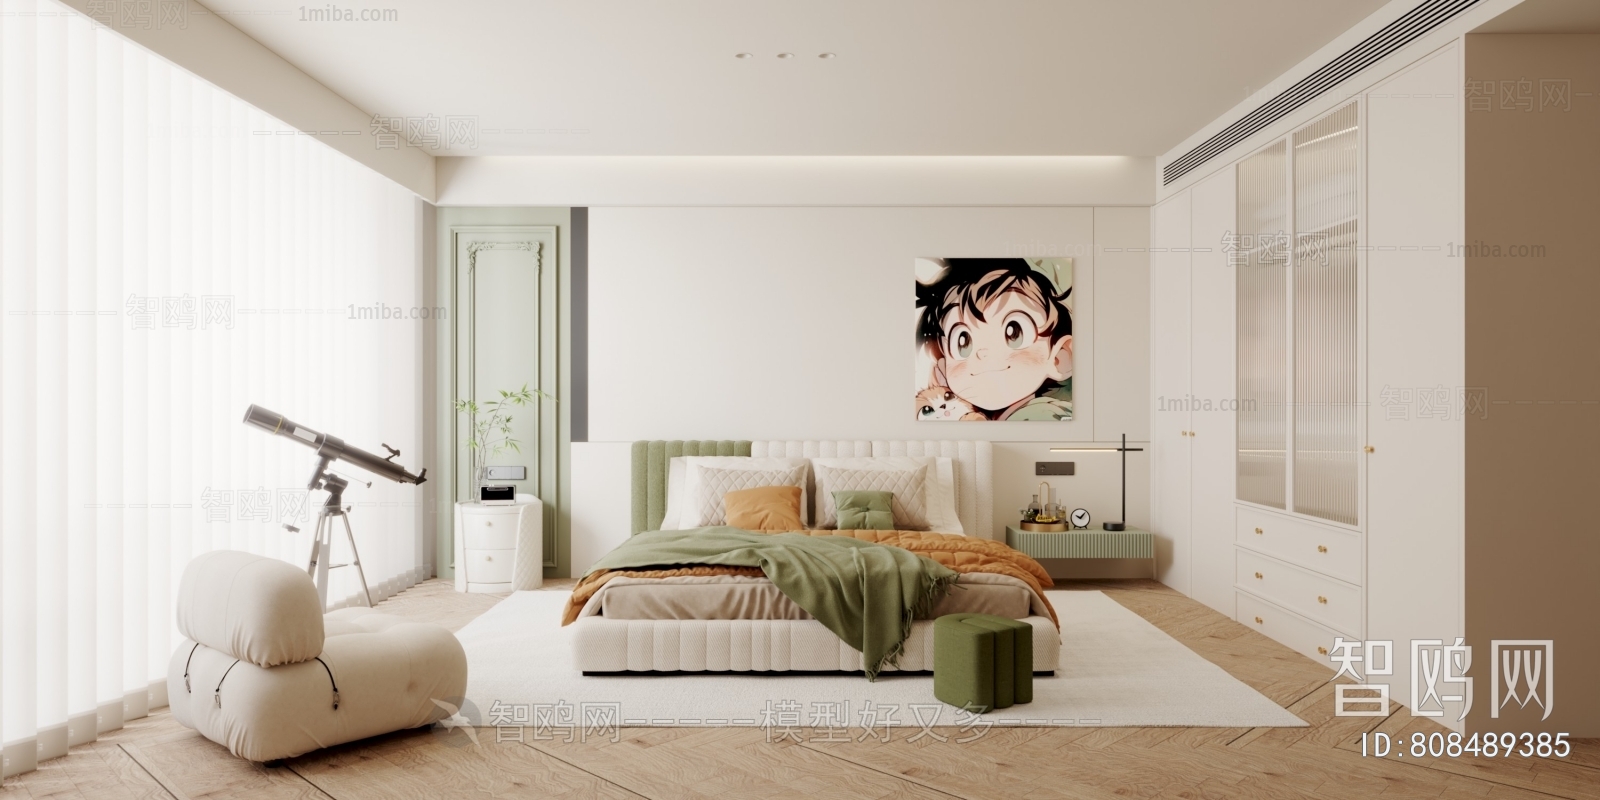 Modern French Style Bedroom